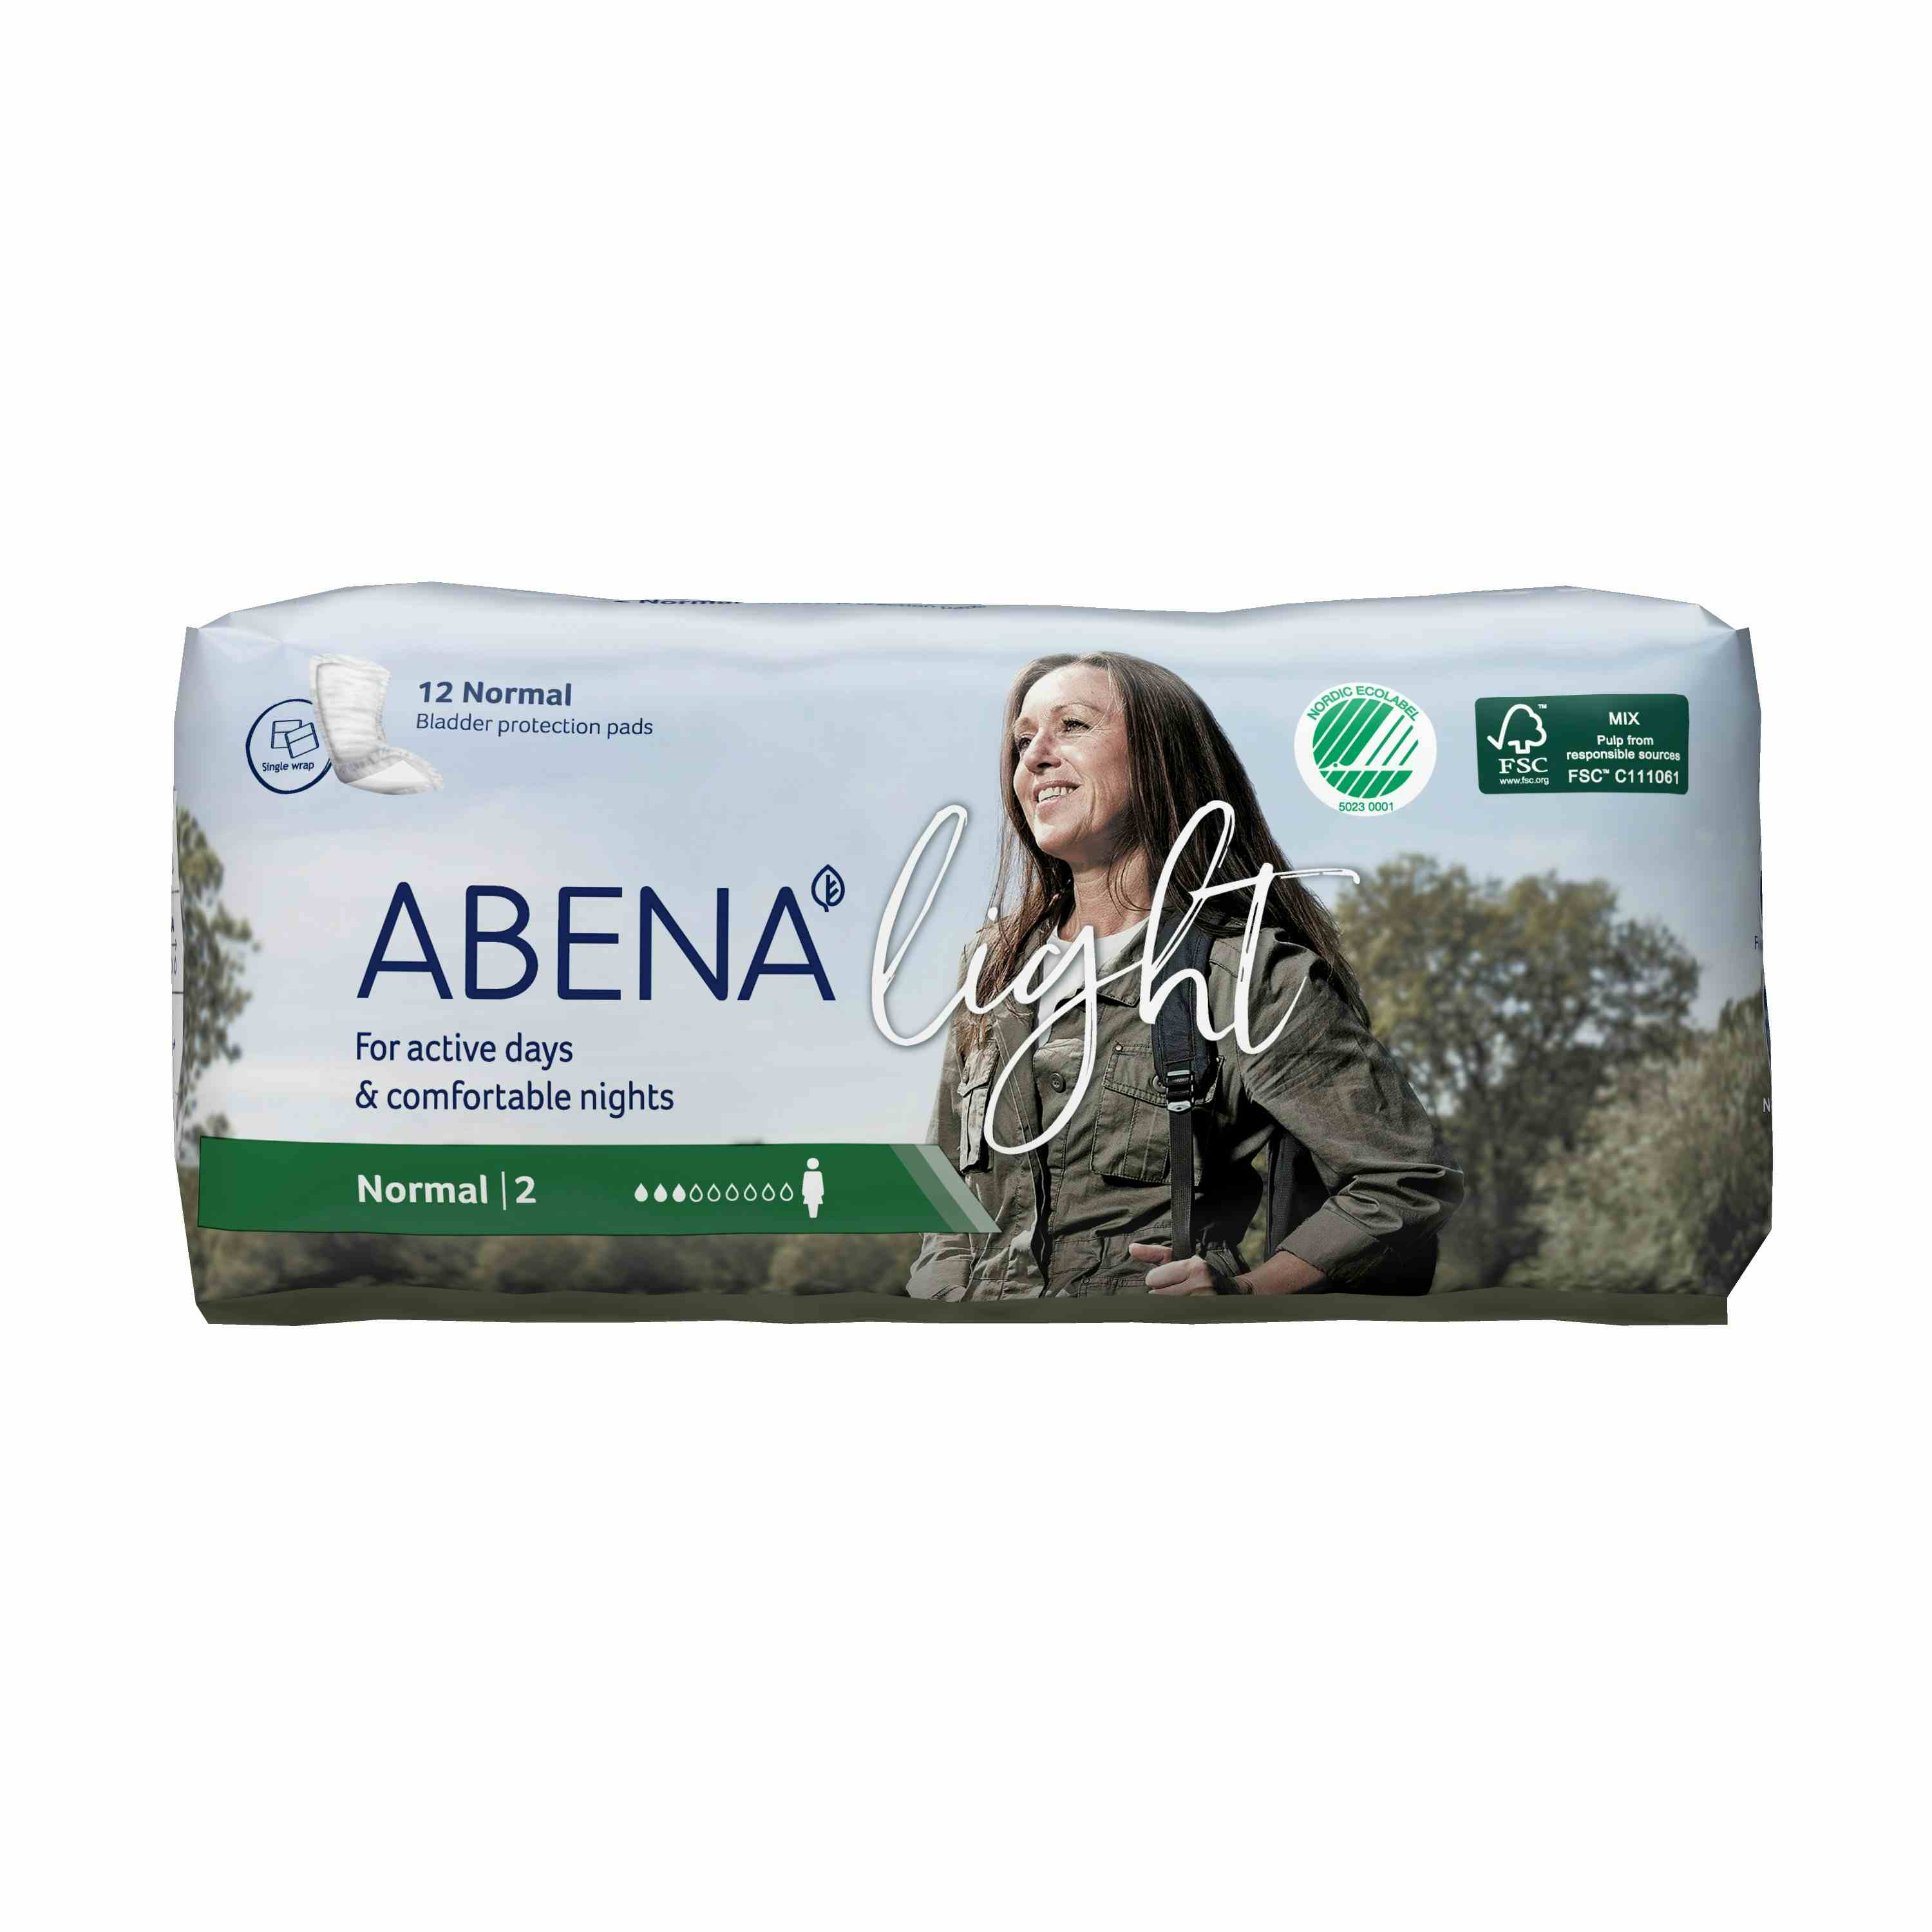 Abena Light Normal Disposable Unisex Adult Bladder Control Pad, Light Absorbency, 1000017157, One Size Fits Most -  Case of 144 Pads (12 Bags)